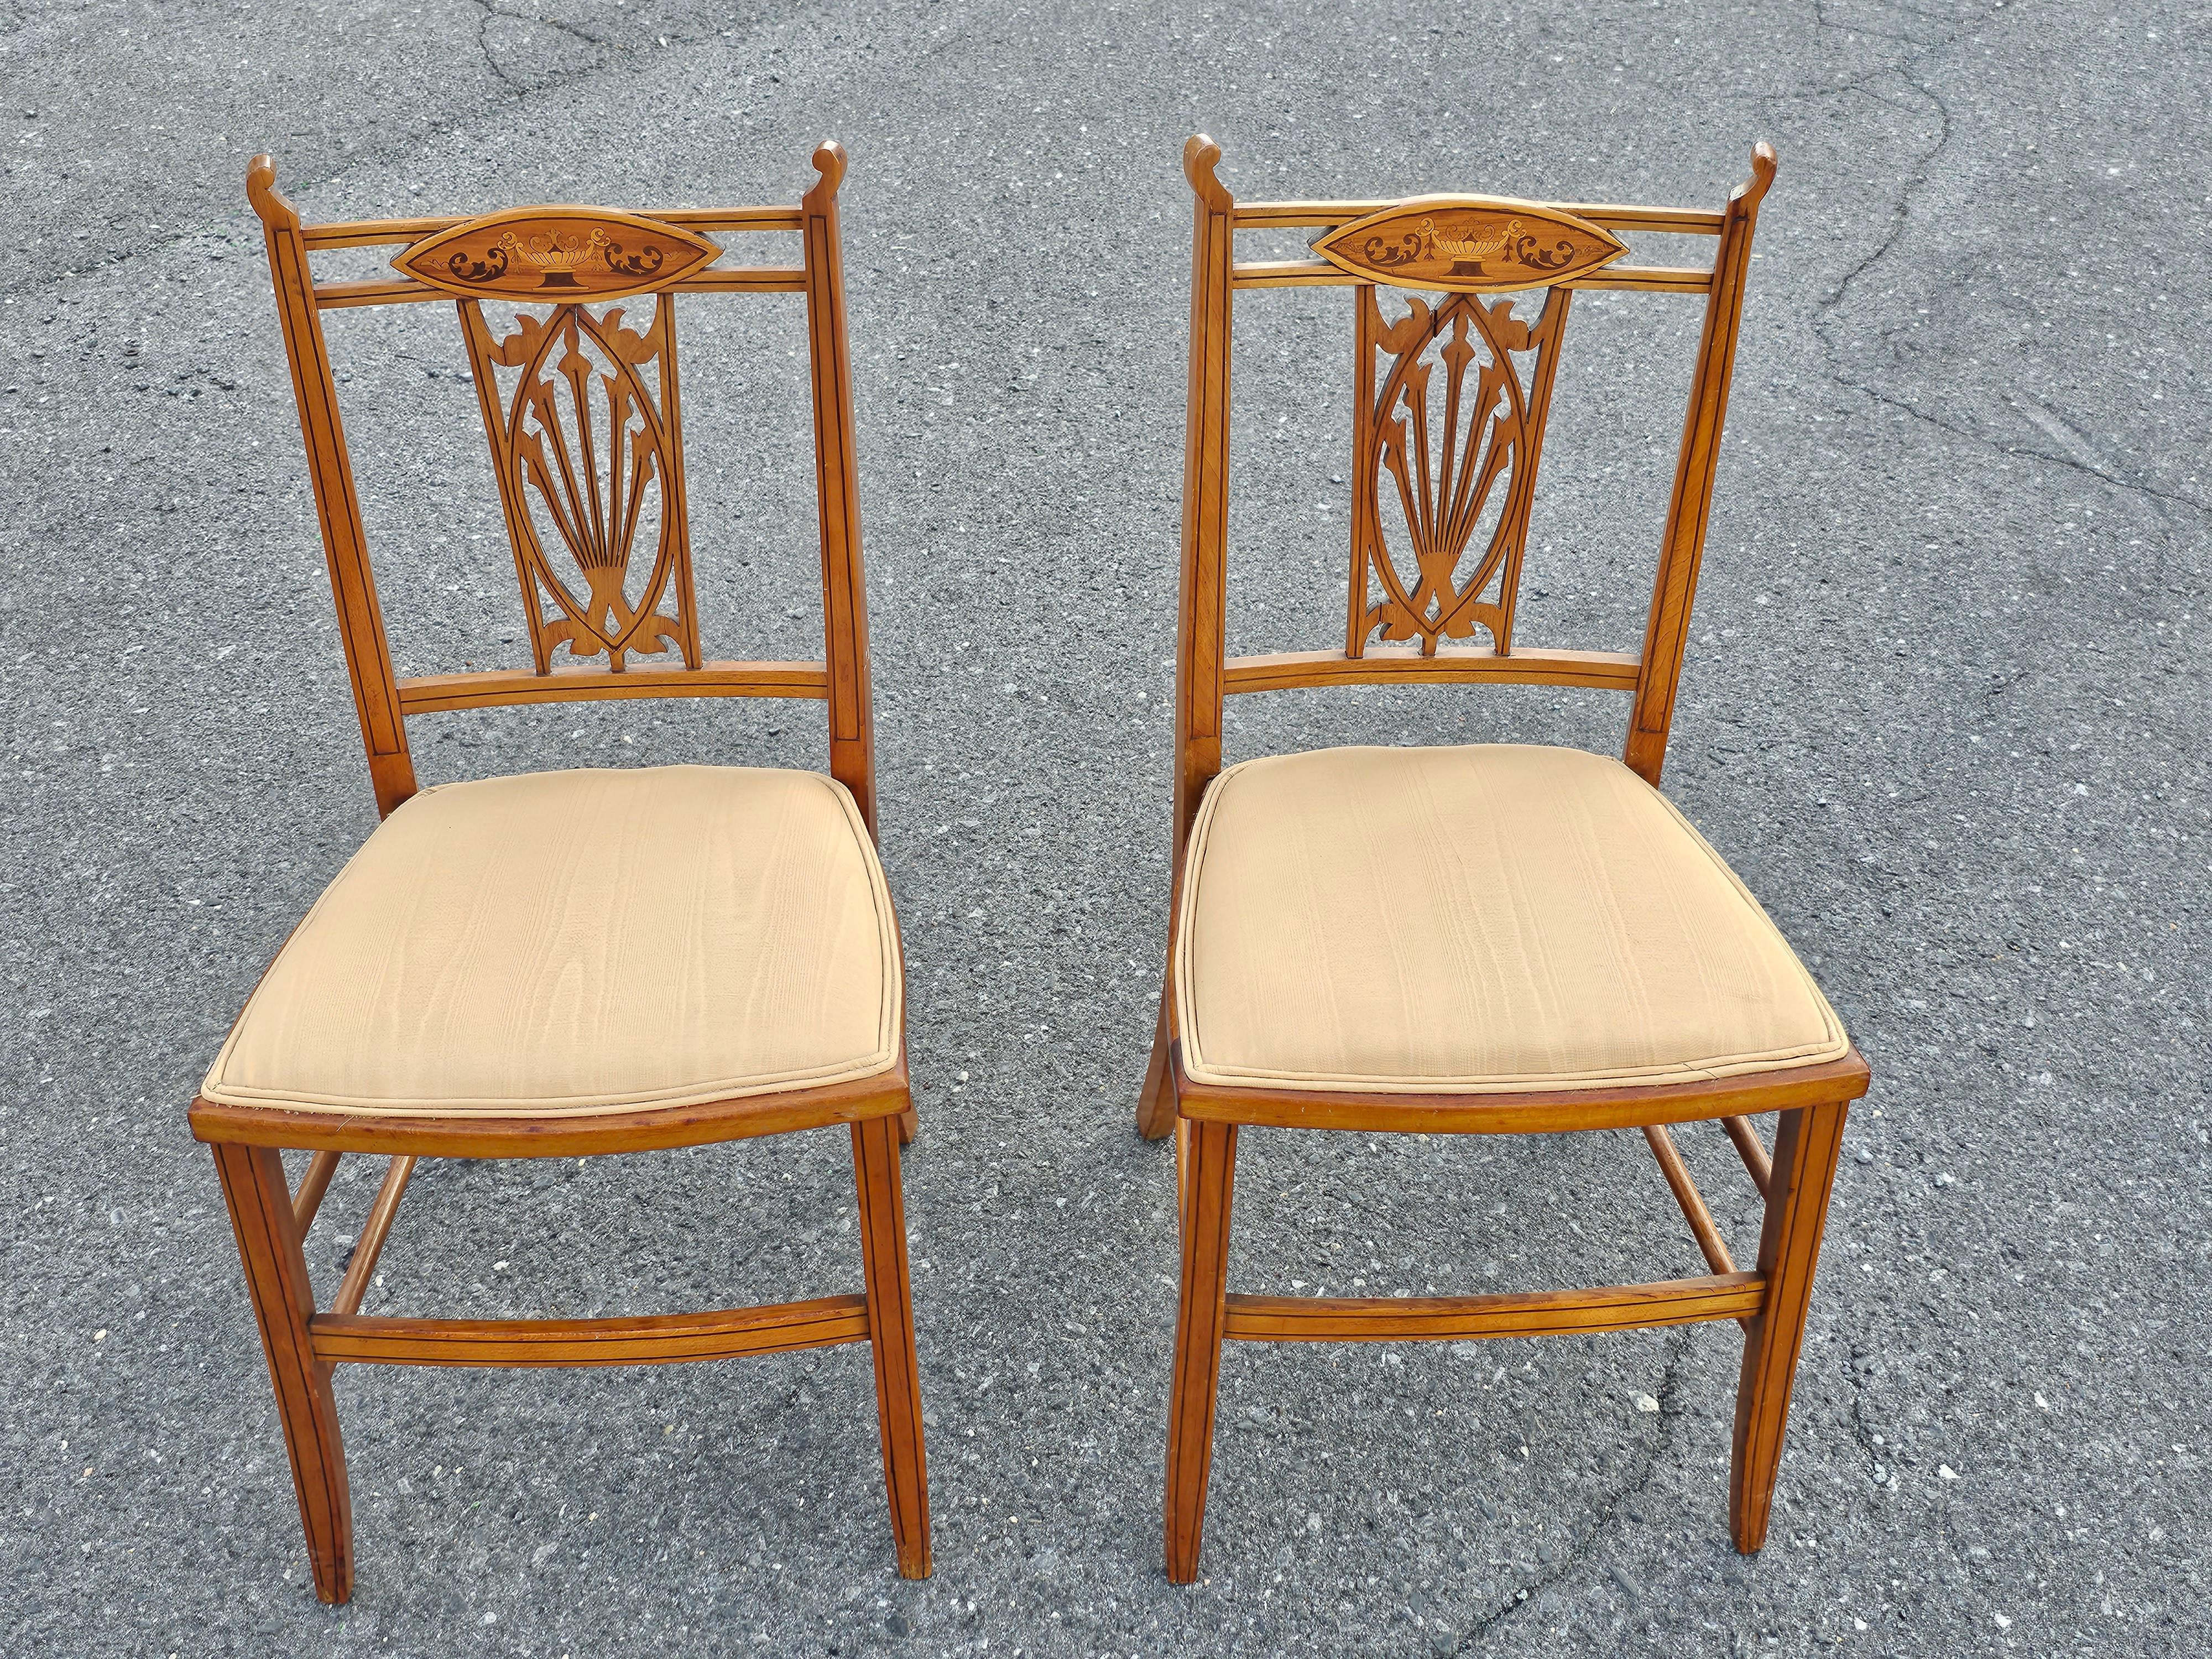 A set of Four Edwardian Satinwood Inlaid side chairs , game table chairs. Circa Late 19th Century-Early 20th Century. Clean Upholstered seats. Recently refinished frame. Very light weight.